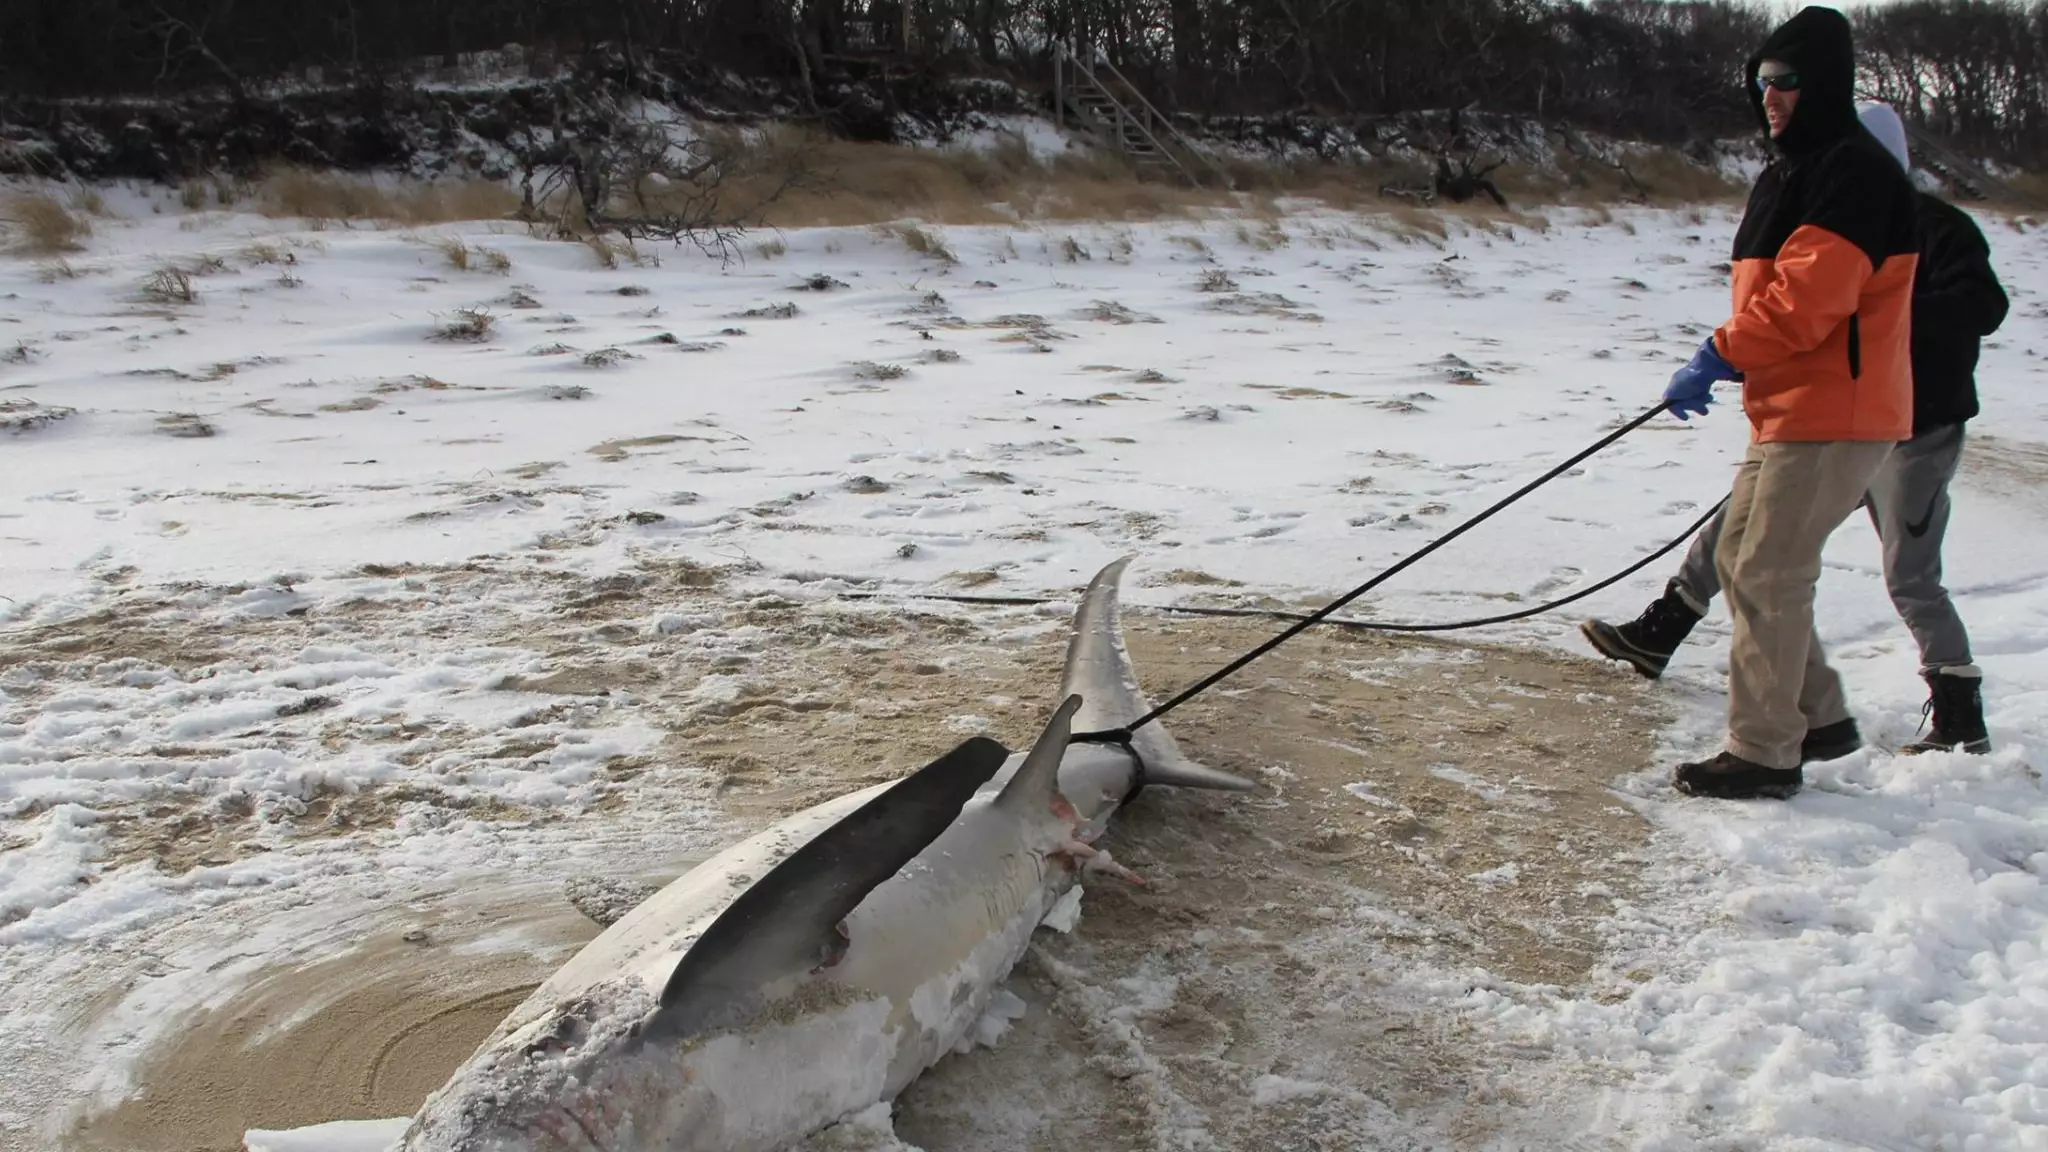 Sharks 'Freezing To Death' As Temperatures Drop In Cape Cod